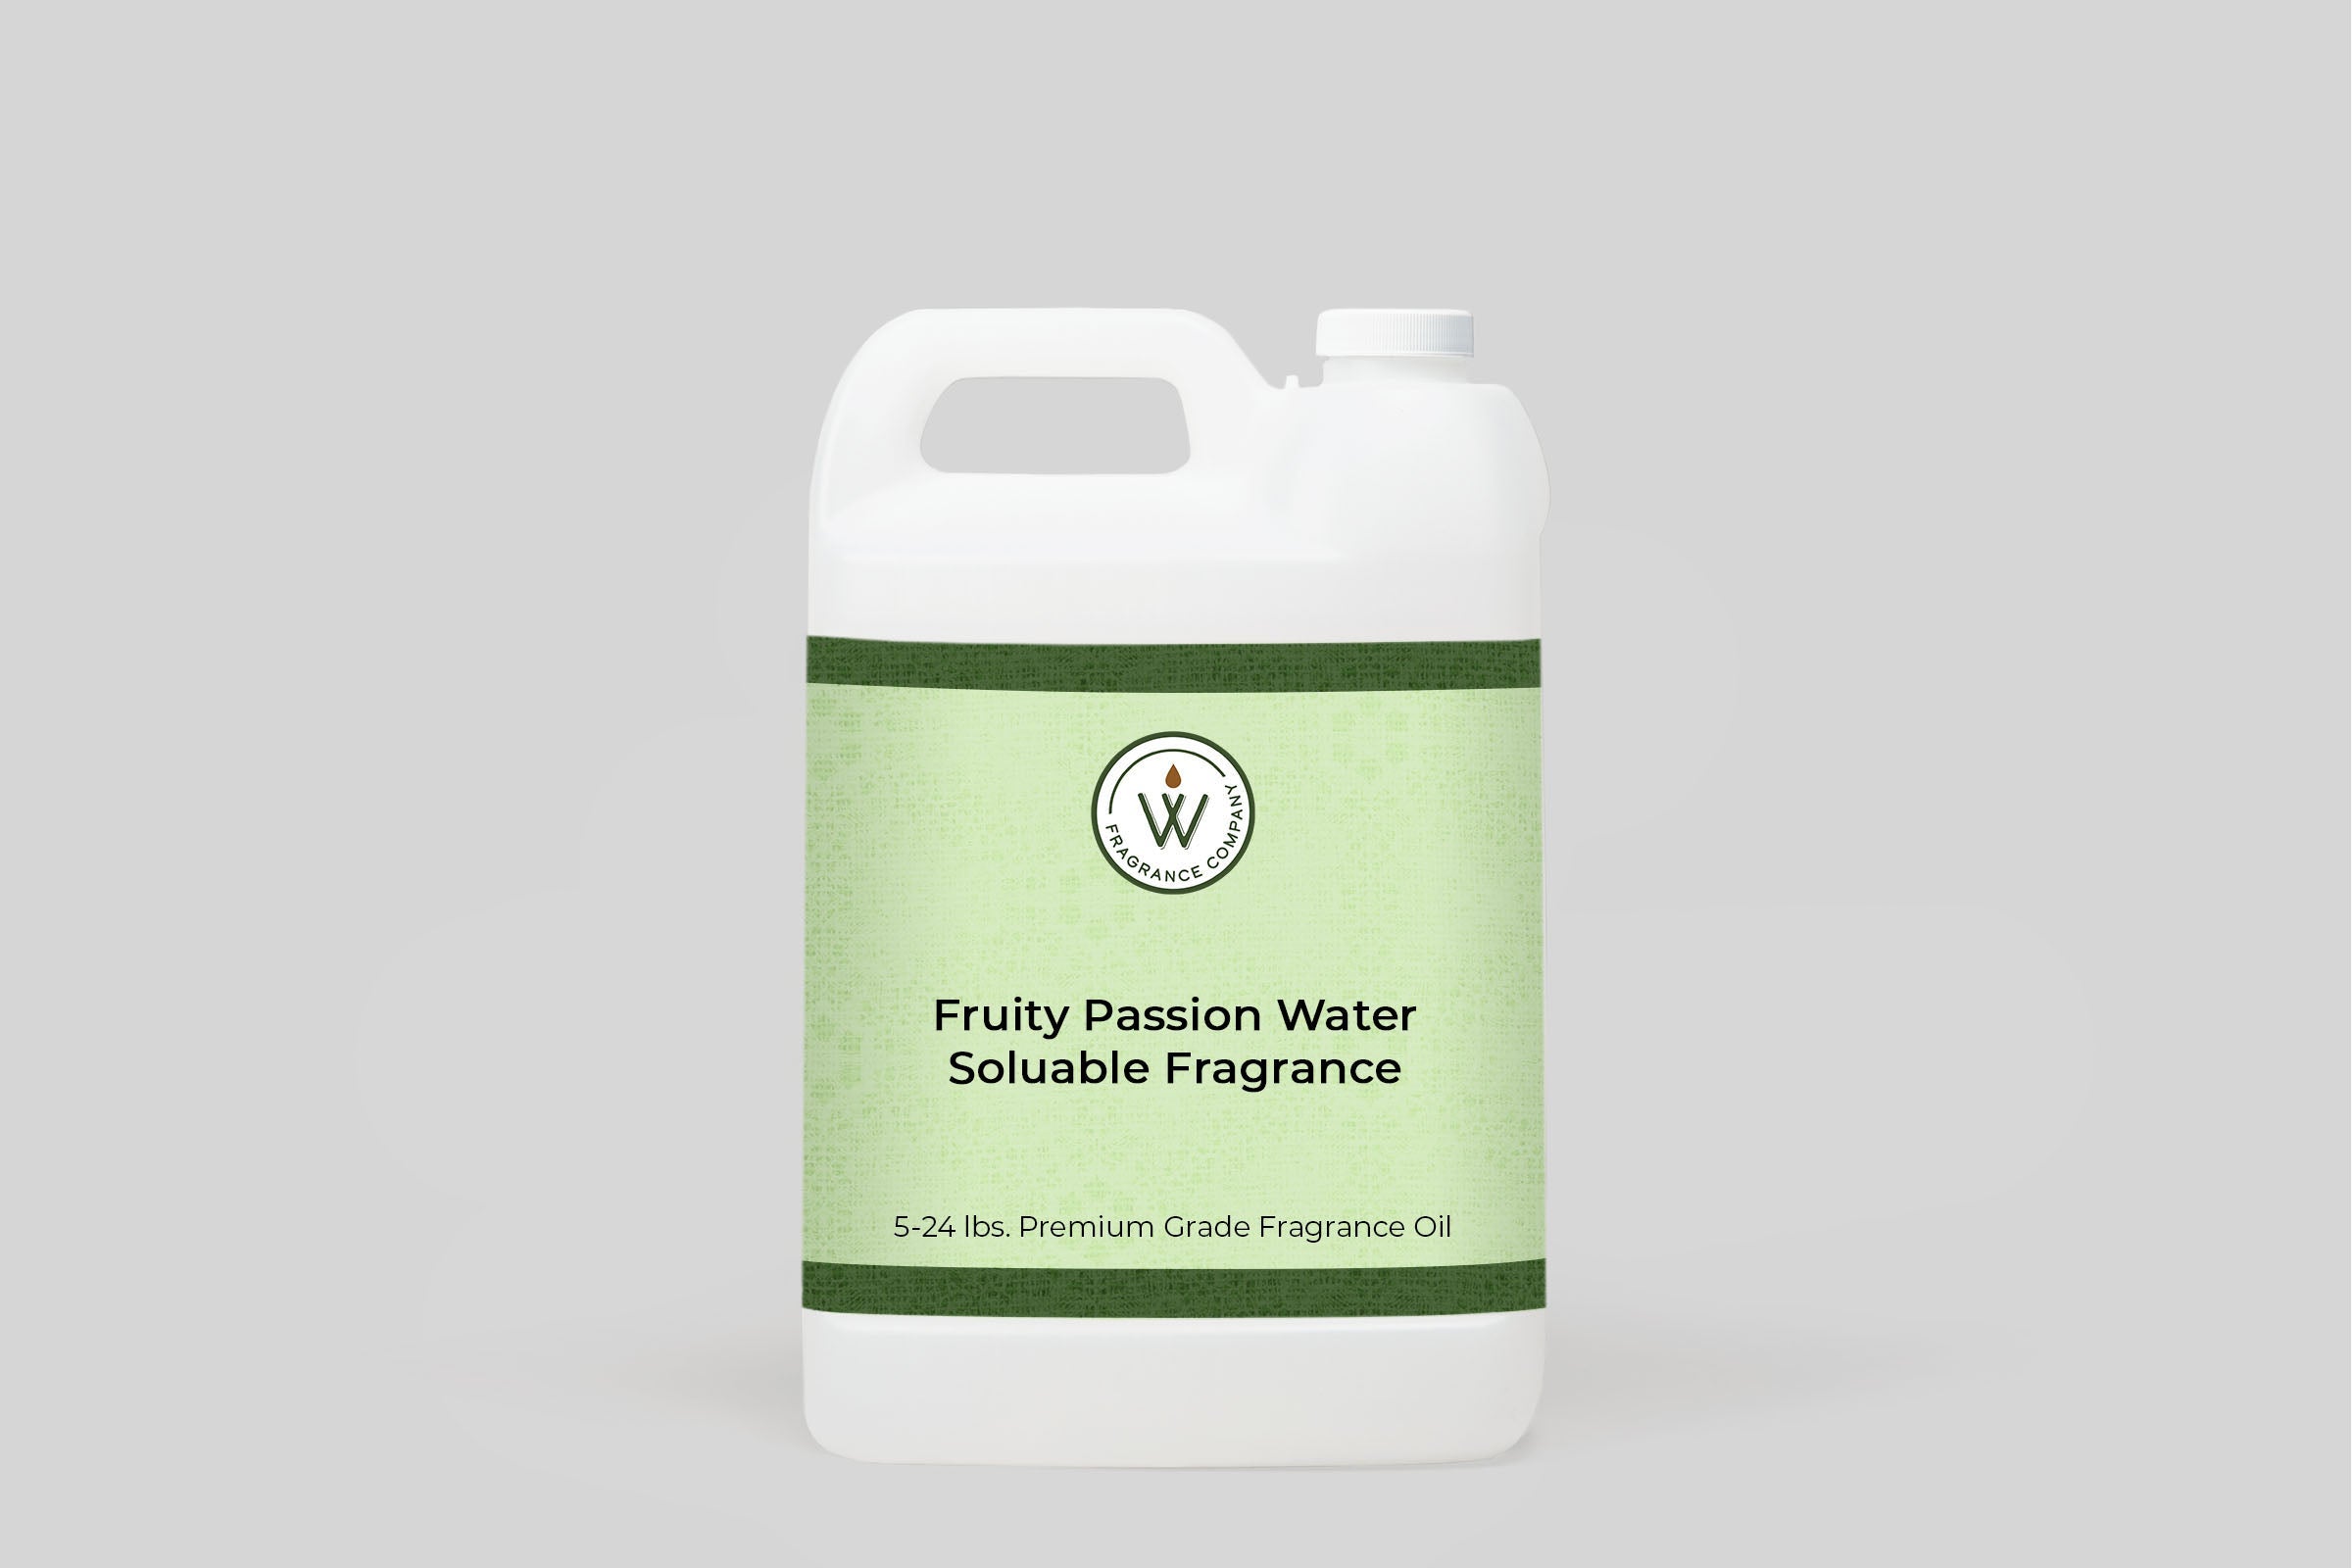 Fruity Passion Water Soluble Fragrance